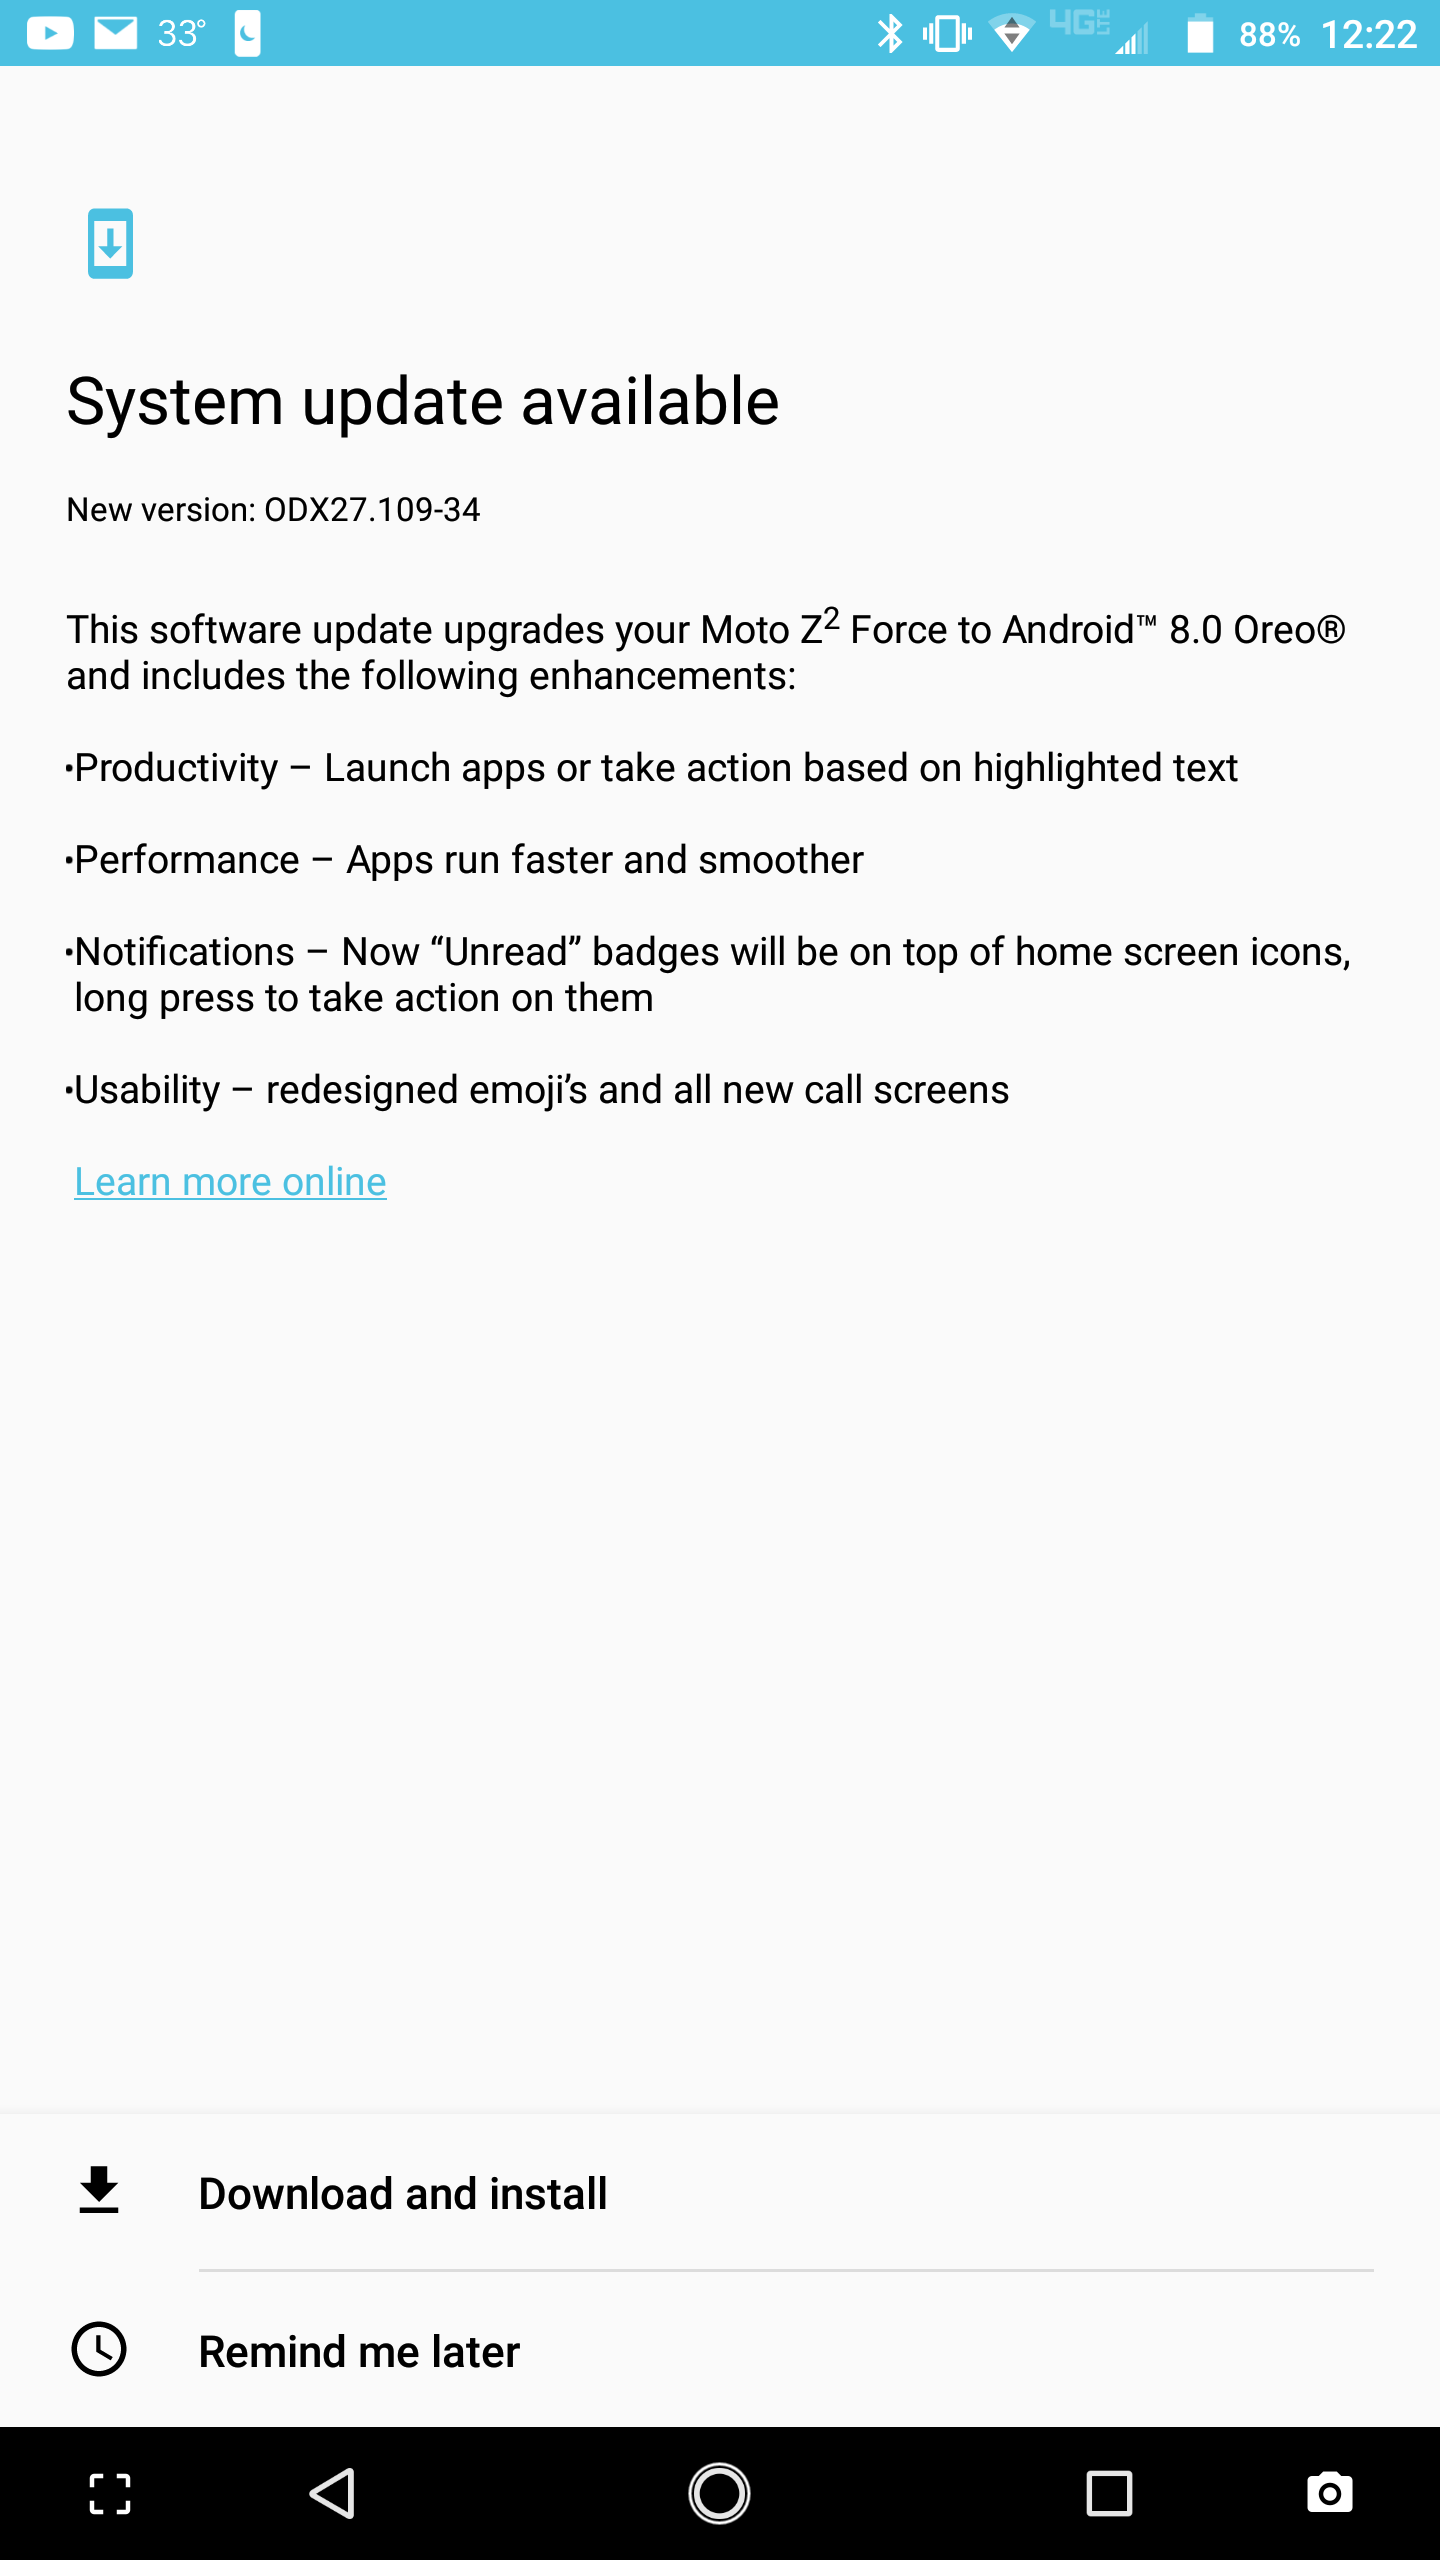 verizon branded moto z2 force now receiving android oreo 8.0 update over-the-air